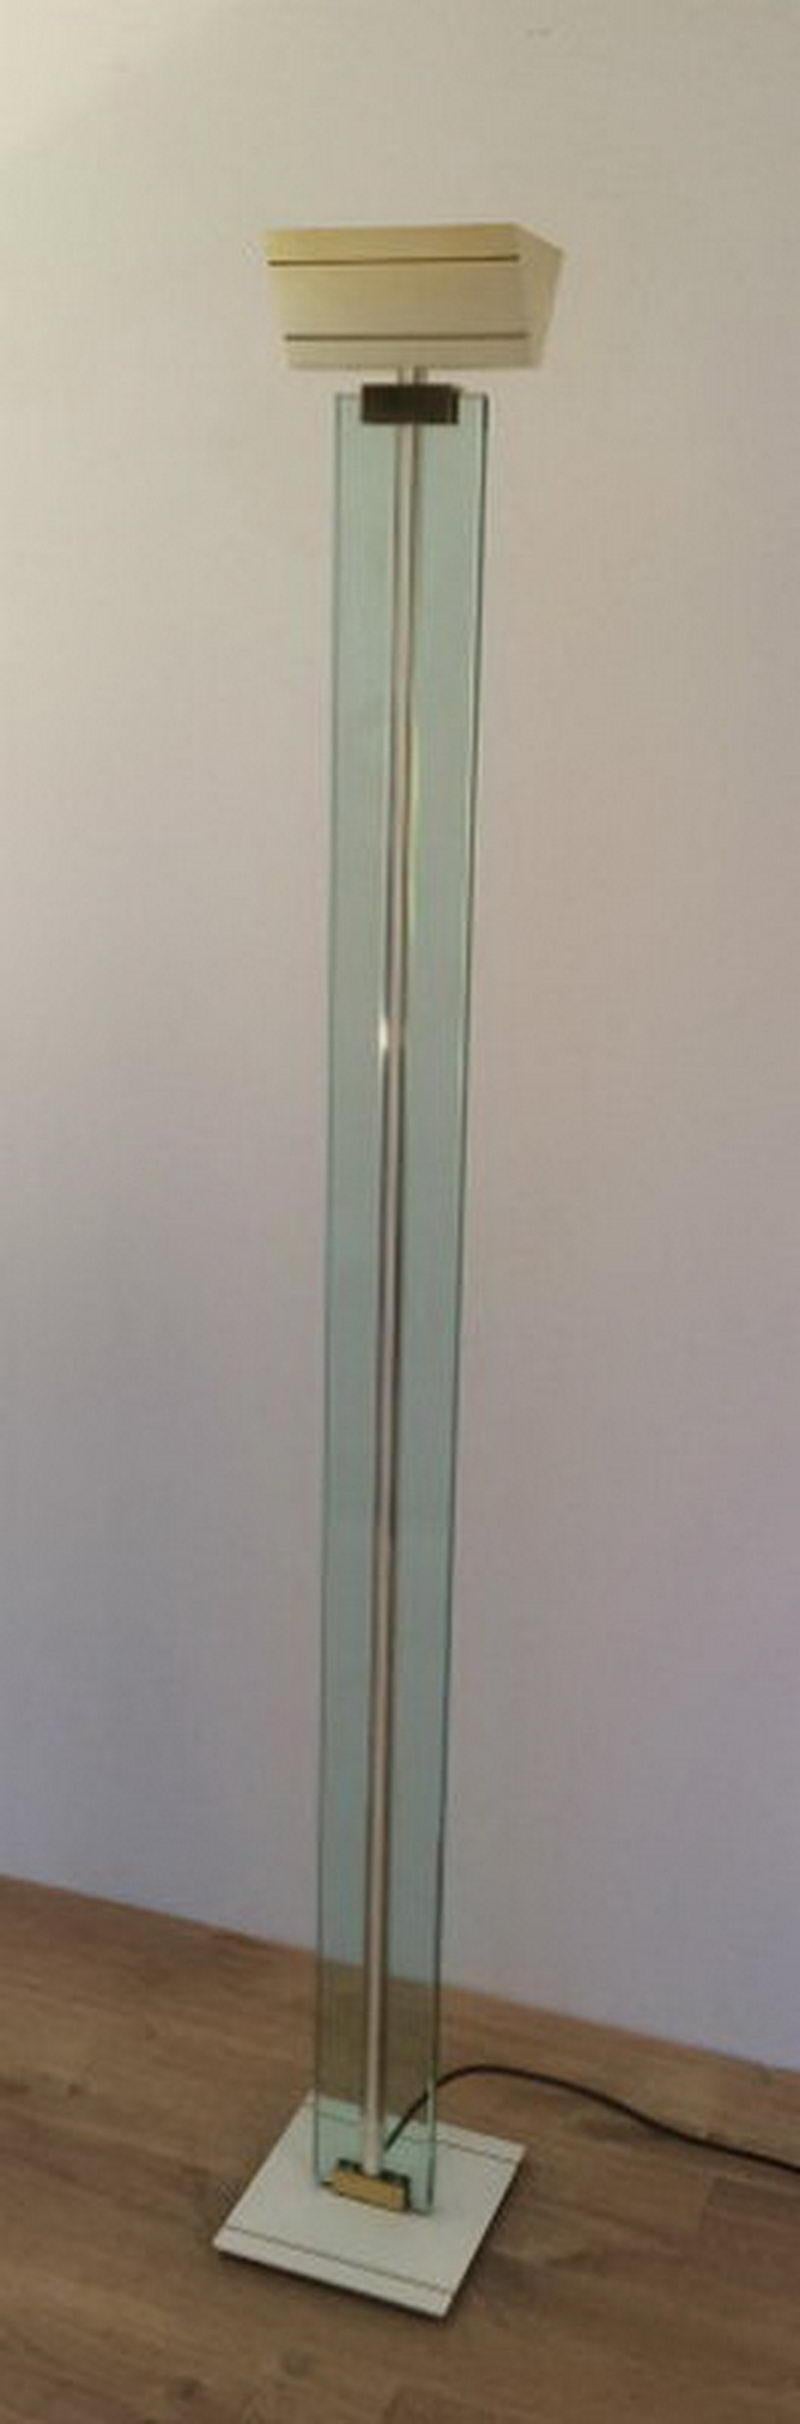 Glass, Brass and Lacquered Metal Floor Lamp, Circa 1970 For Sale 4